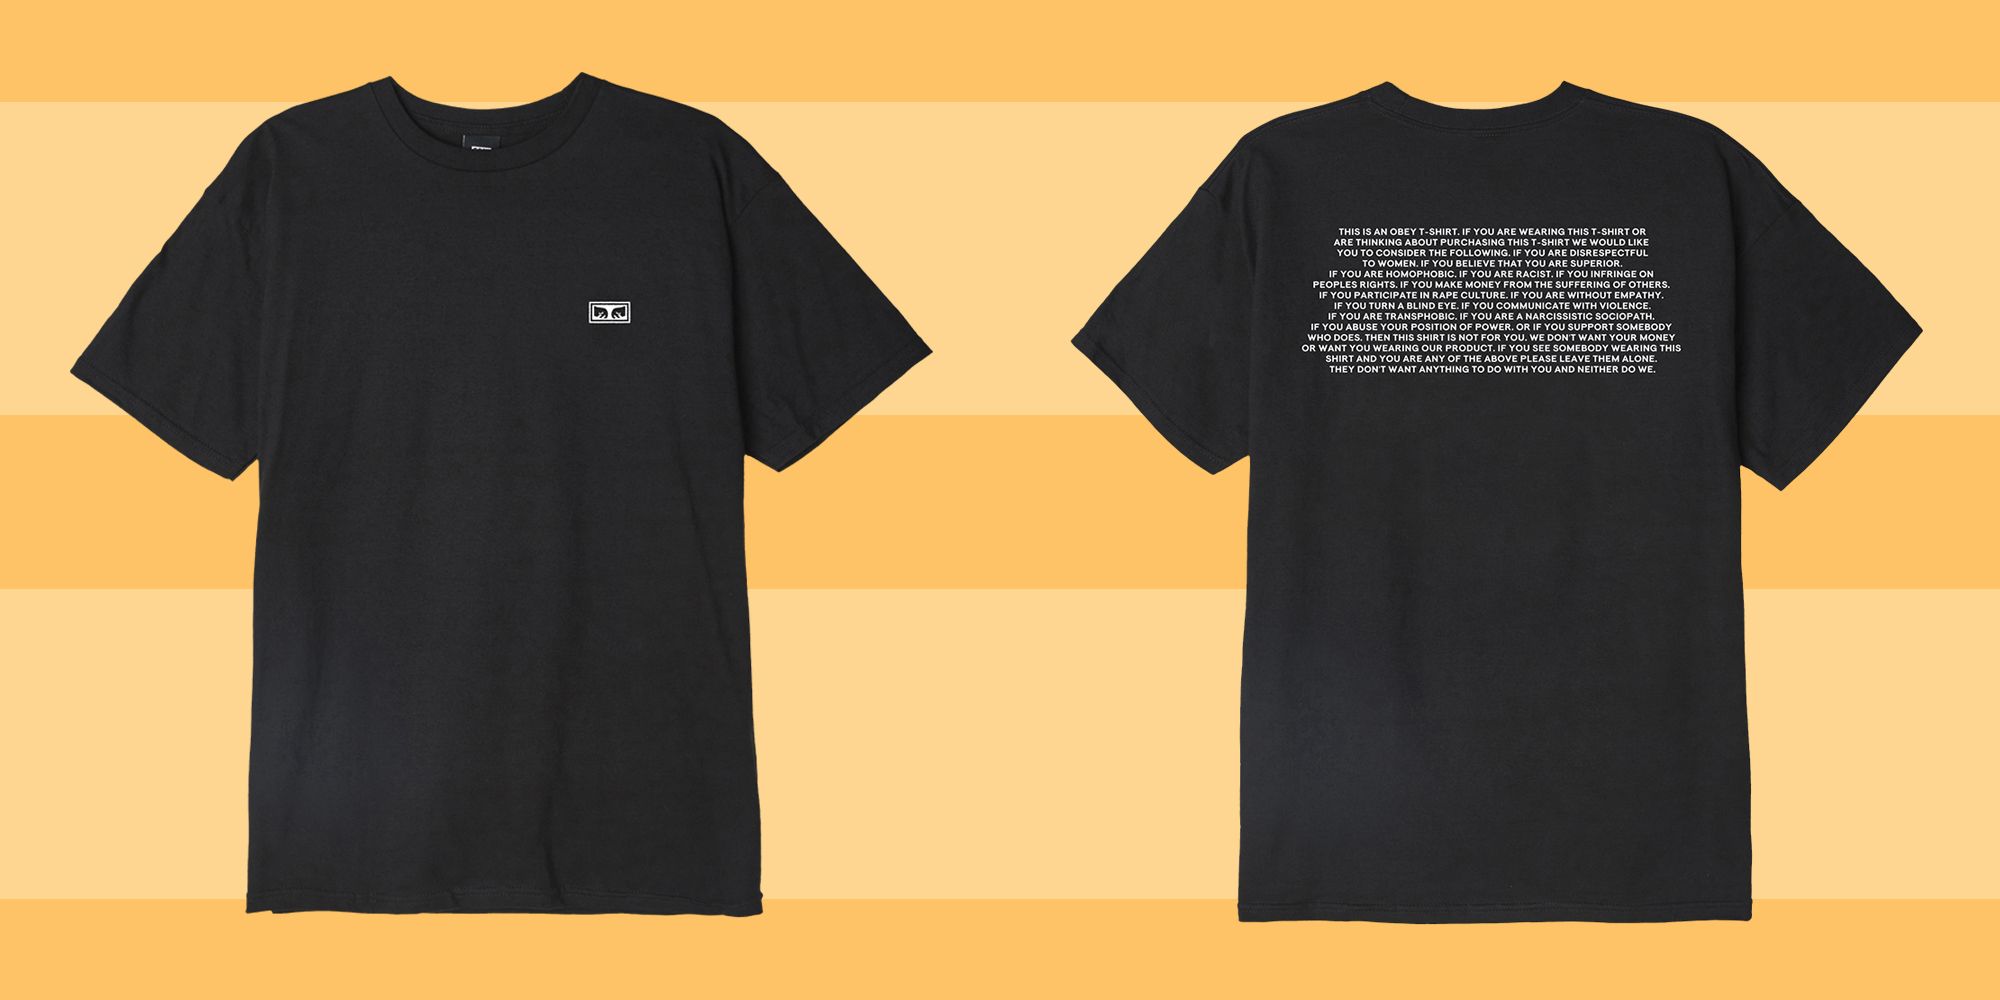 Obey T Shirt Proceeds Going To Non Profits After El Paso And Dayton Shootings